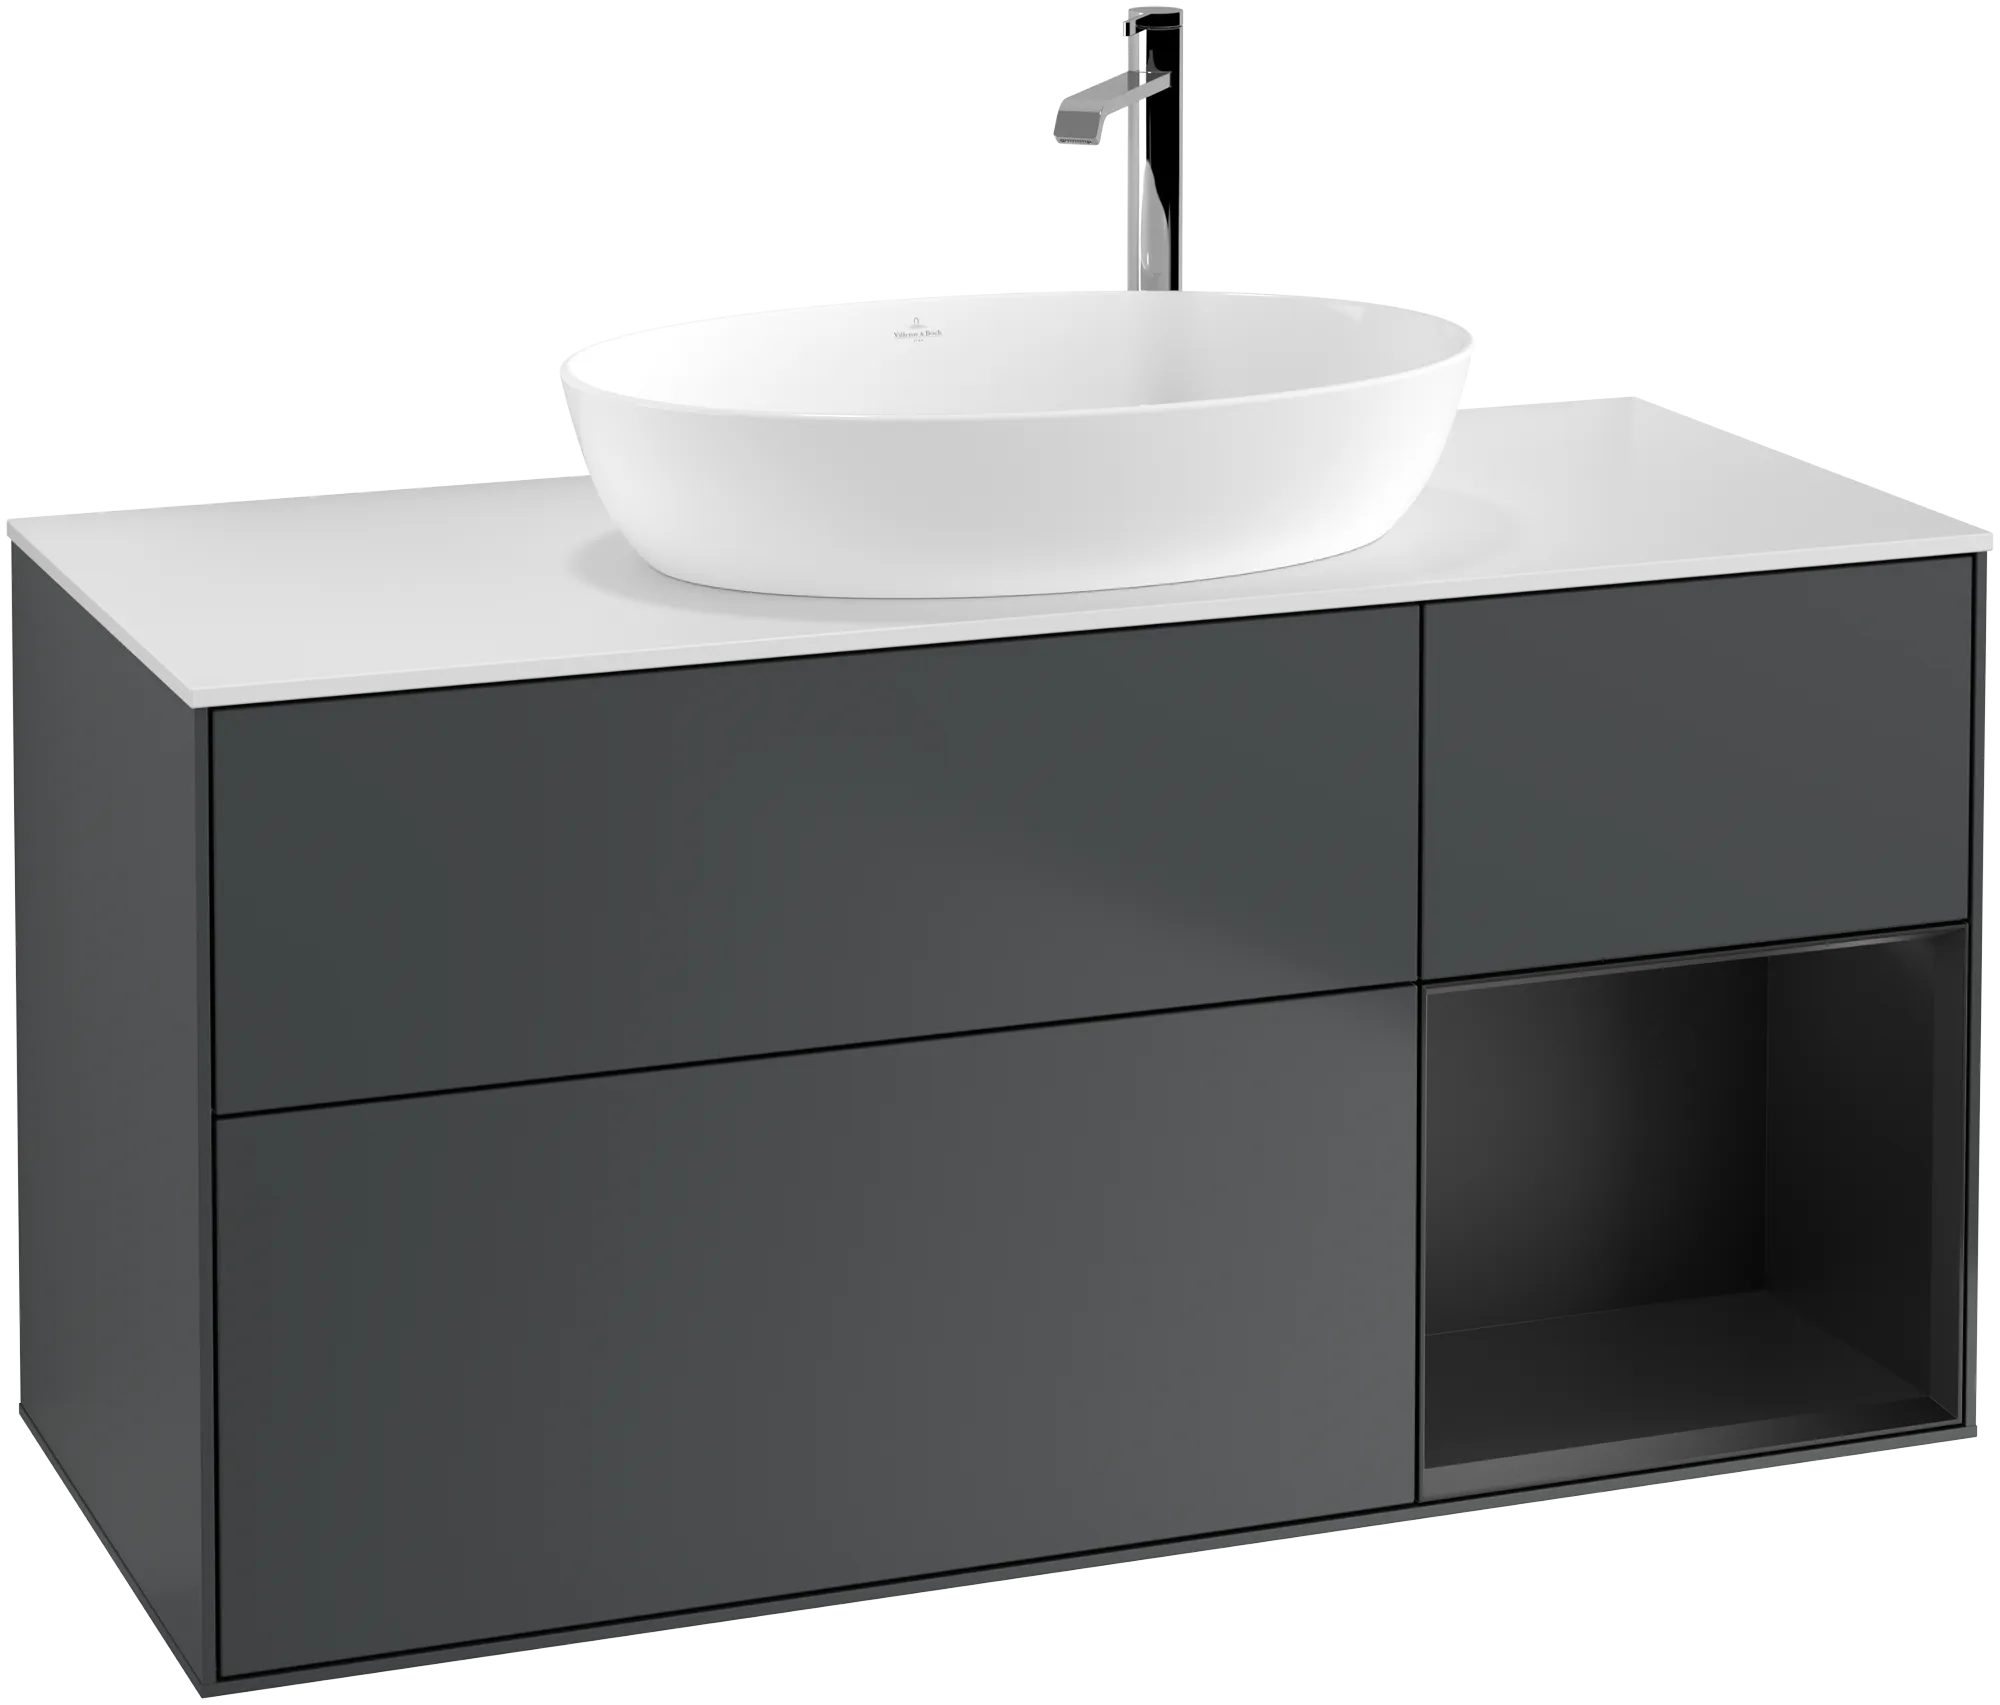 Picture of VILLEROY BOCH Finion Vanity unit, with lighting, 3 pull-out compartments, 1200 x 603 x 501 mm, Midnight Blue Matt Lacquer / Black Matt Lacquer / Glass White Matt #G951PDHG